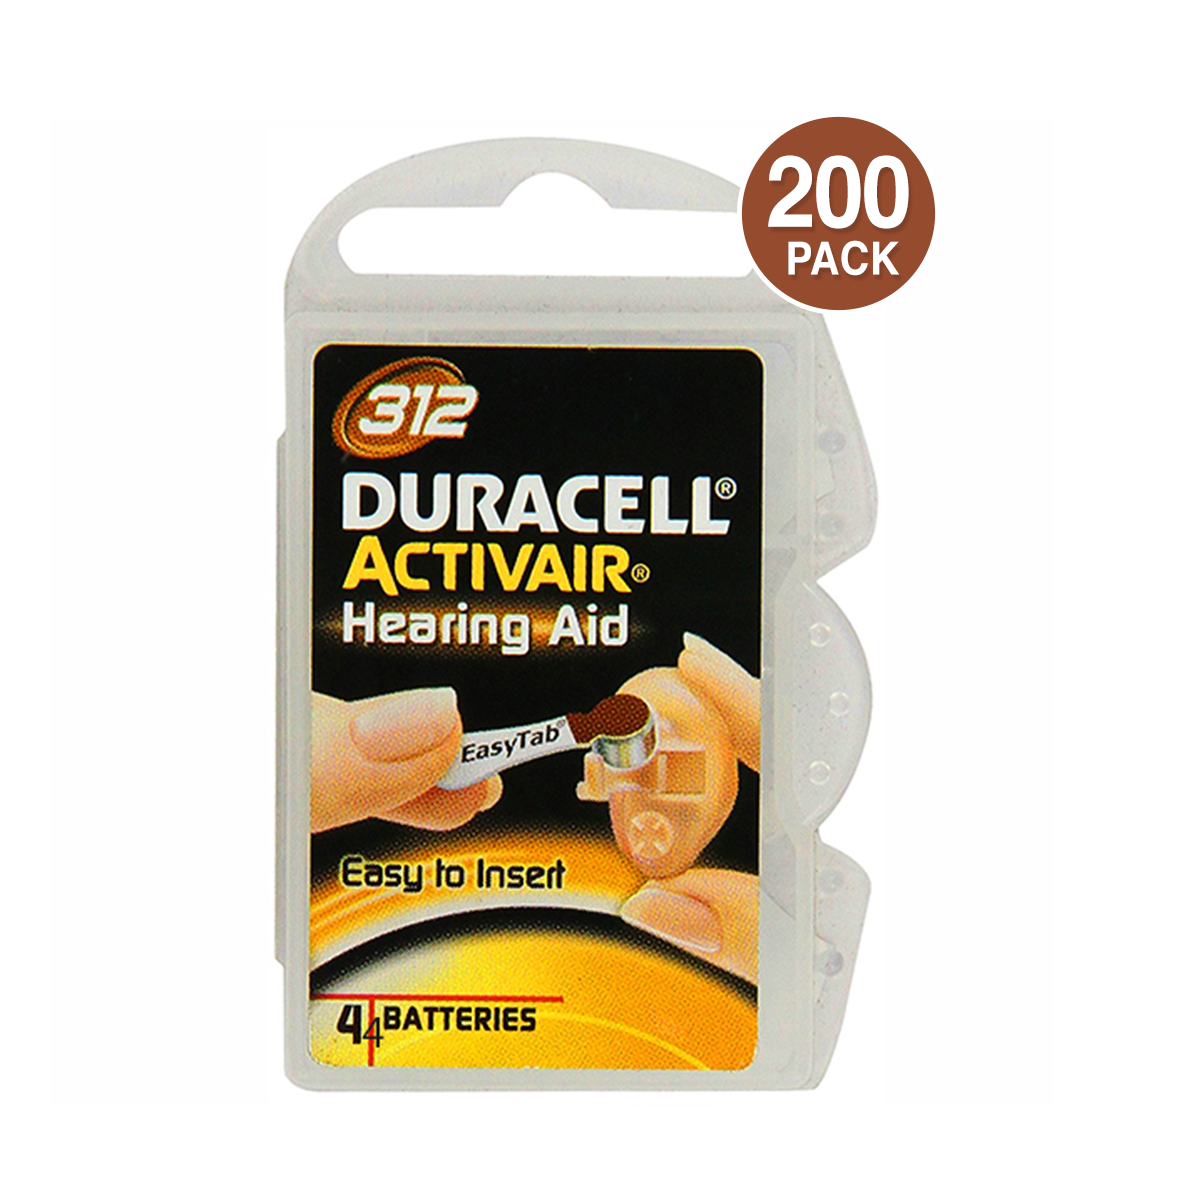 Duracell Hearing Aid Battery Size 312 (200 Pcs)